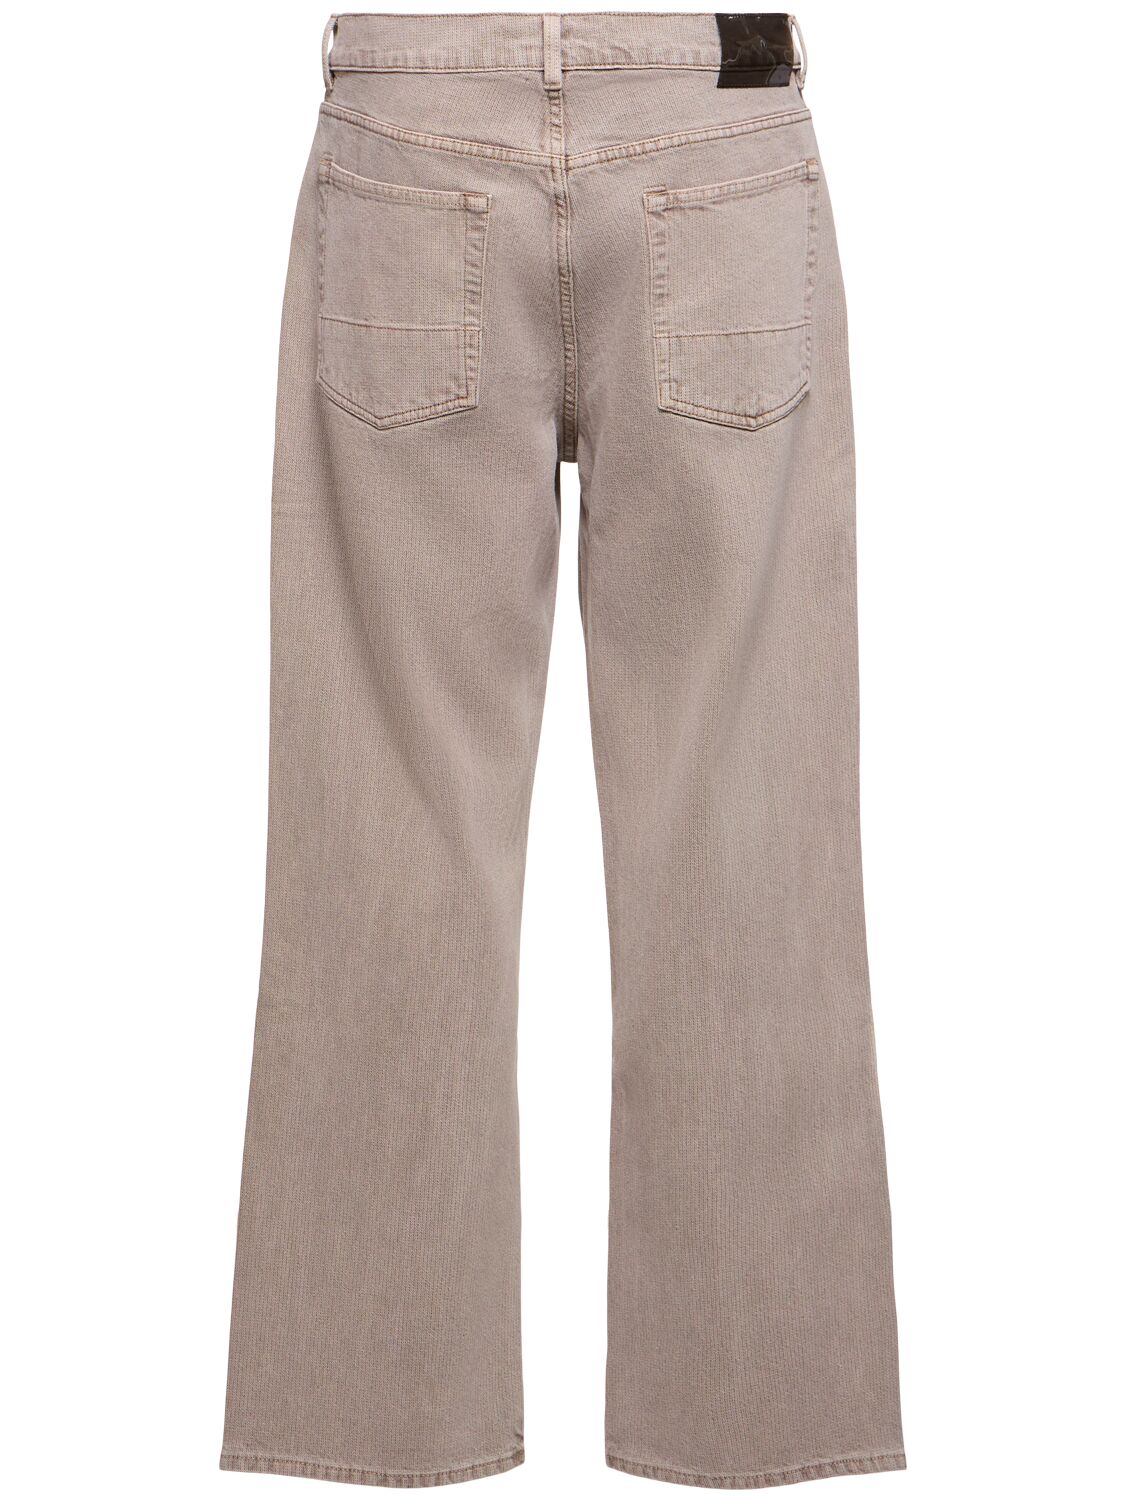 Shop Our Legacy 25.5cm Third Cut Cotton Twill Jeans In Pink